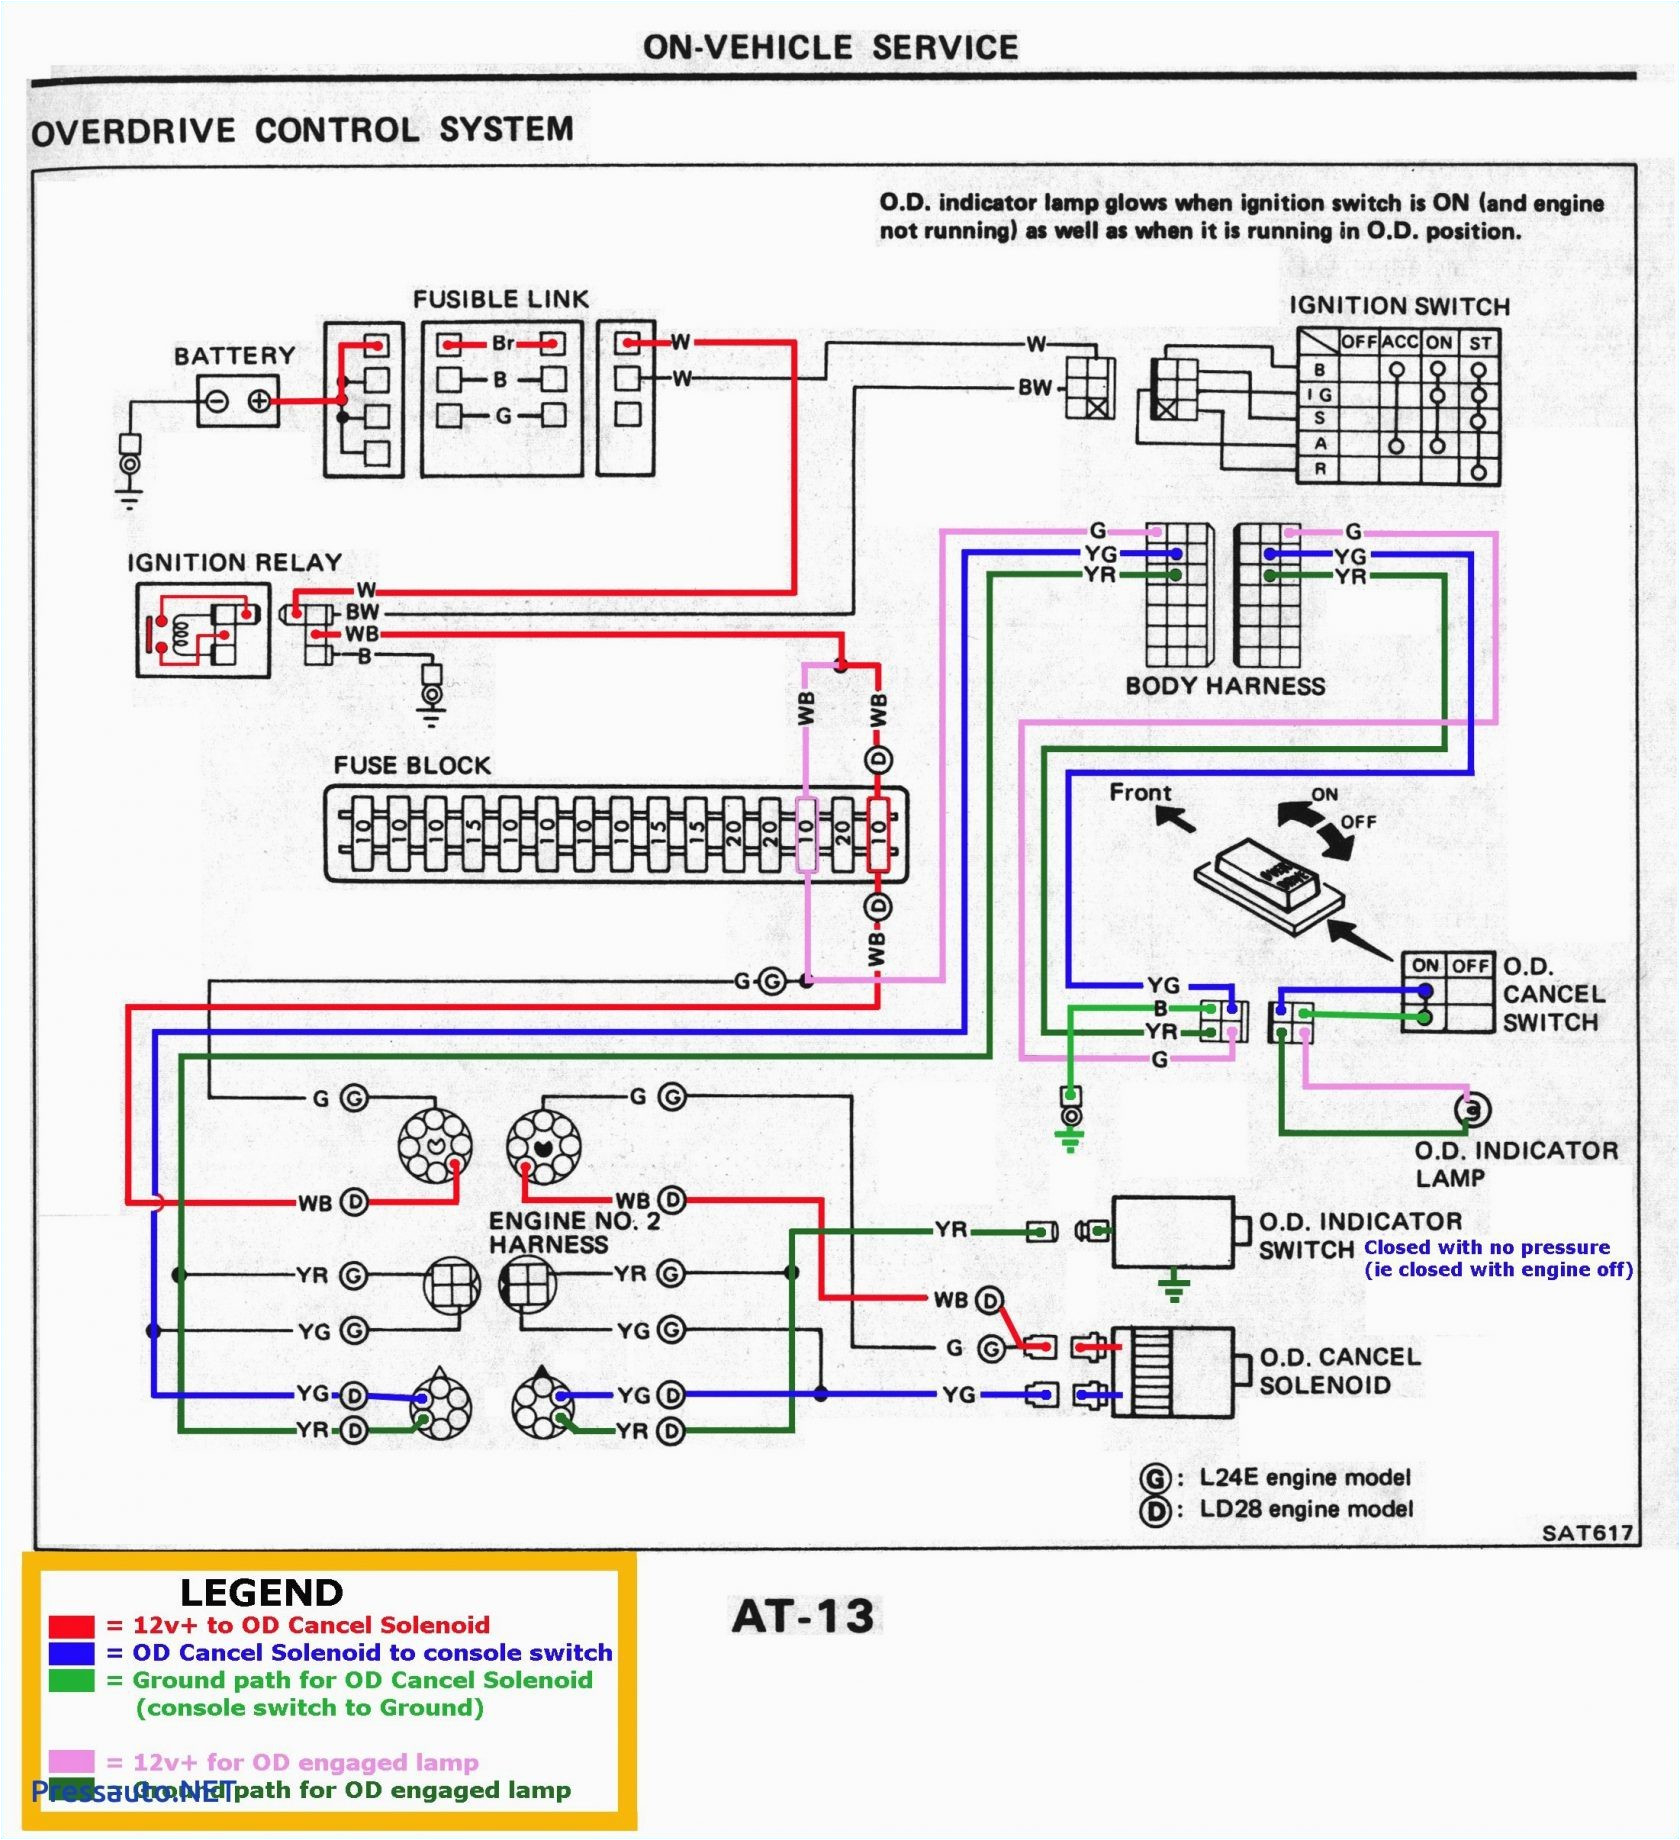 cb radio wiring harness wiring diagram wiring diagram for power inverter on delphi fuel pump wiring harness